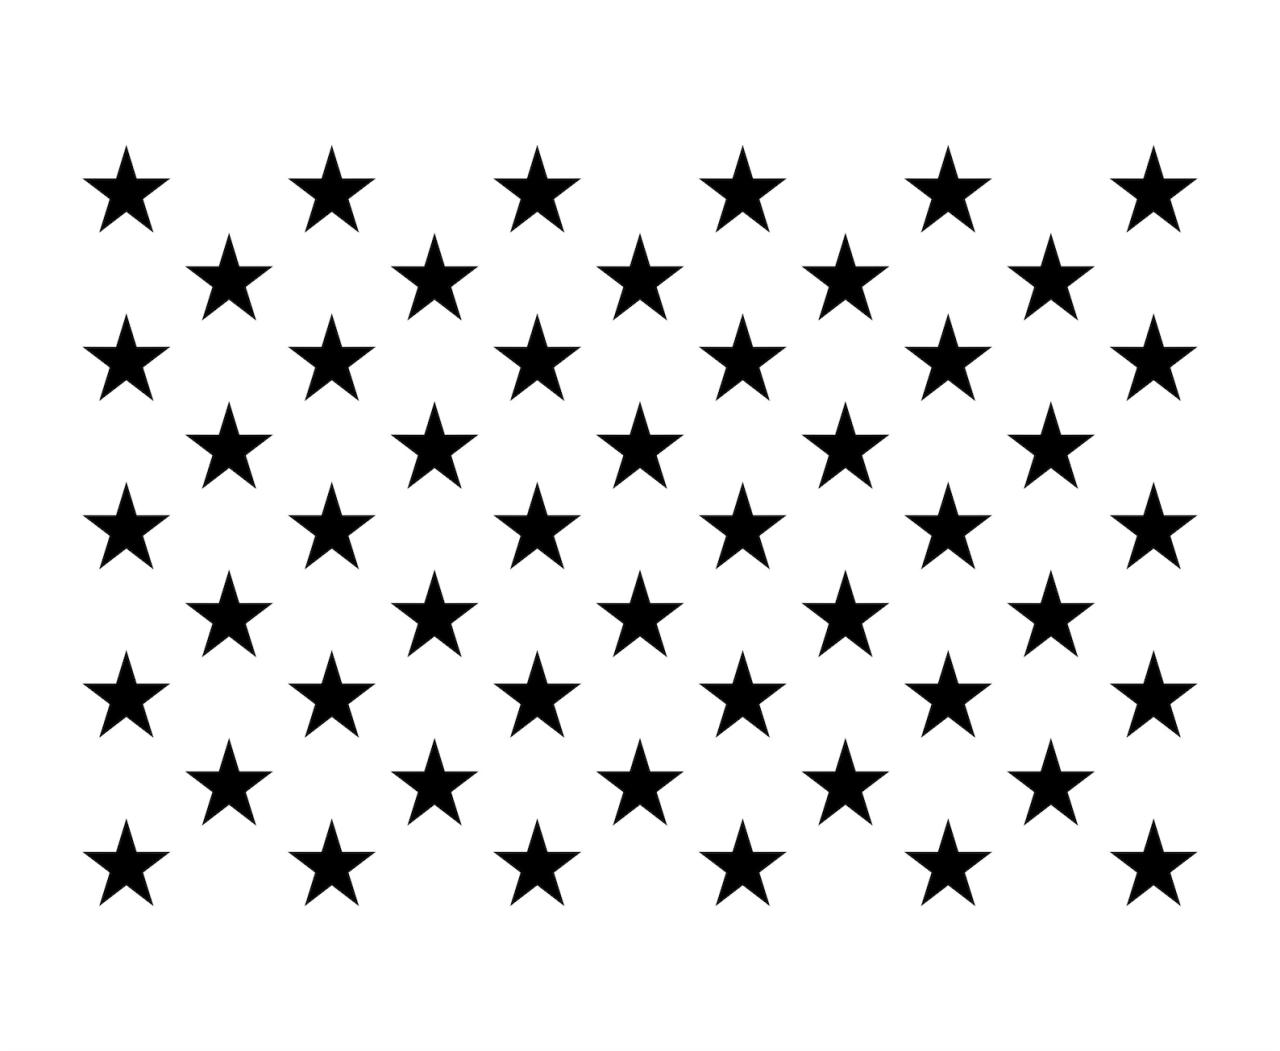 When Was The American Flag Made With 50 Stars